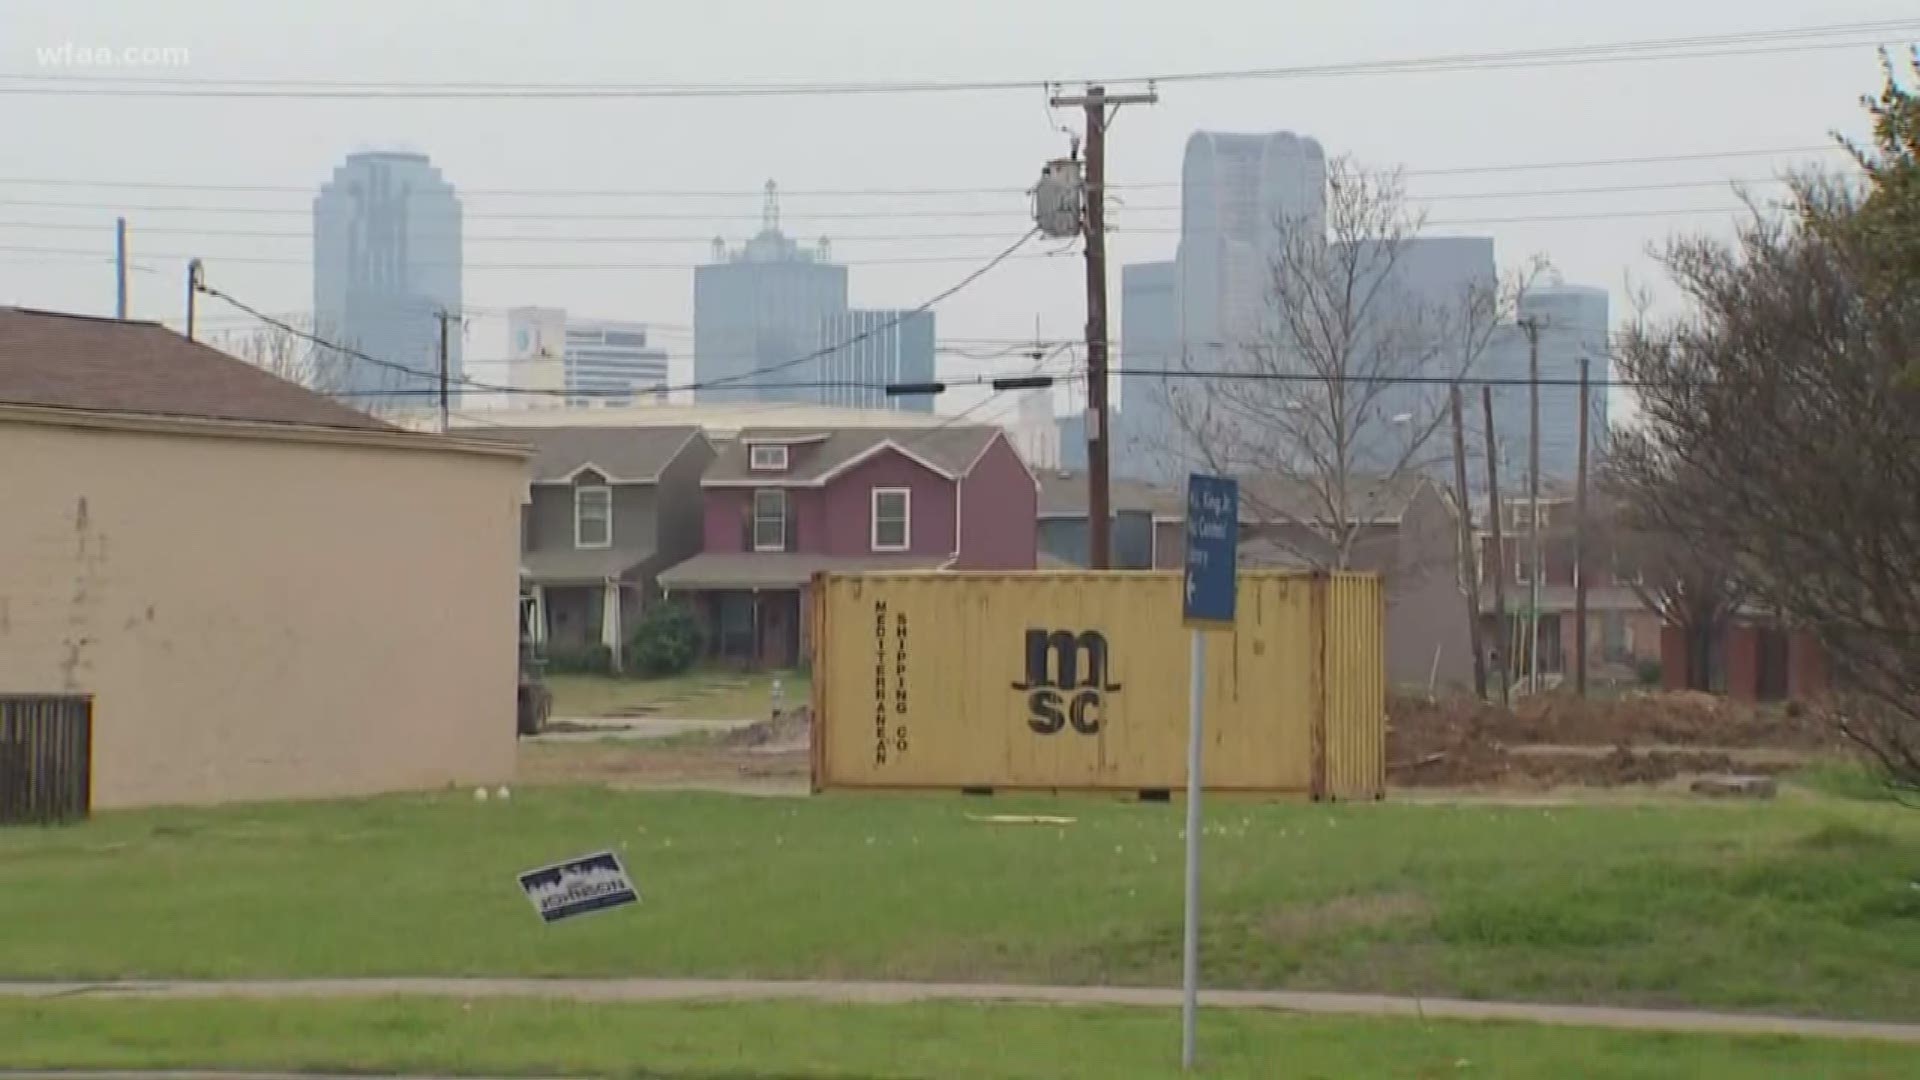 After another local politician admits to taking bribes, WFAA looks into how "big money" preys on lower income neighborhoods.